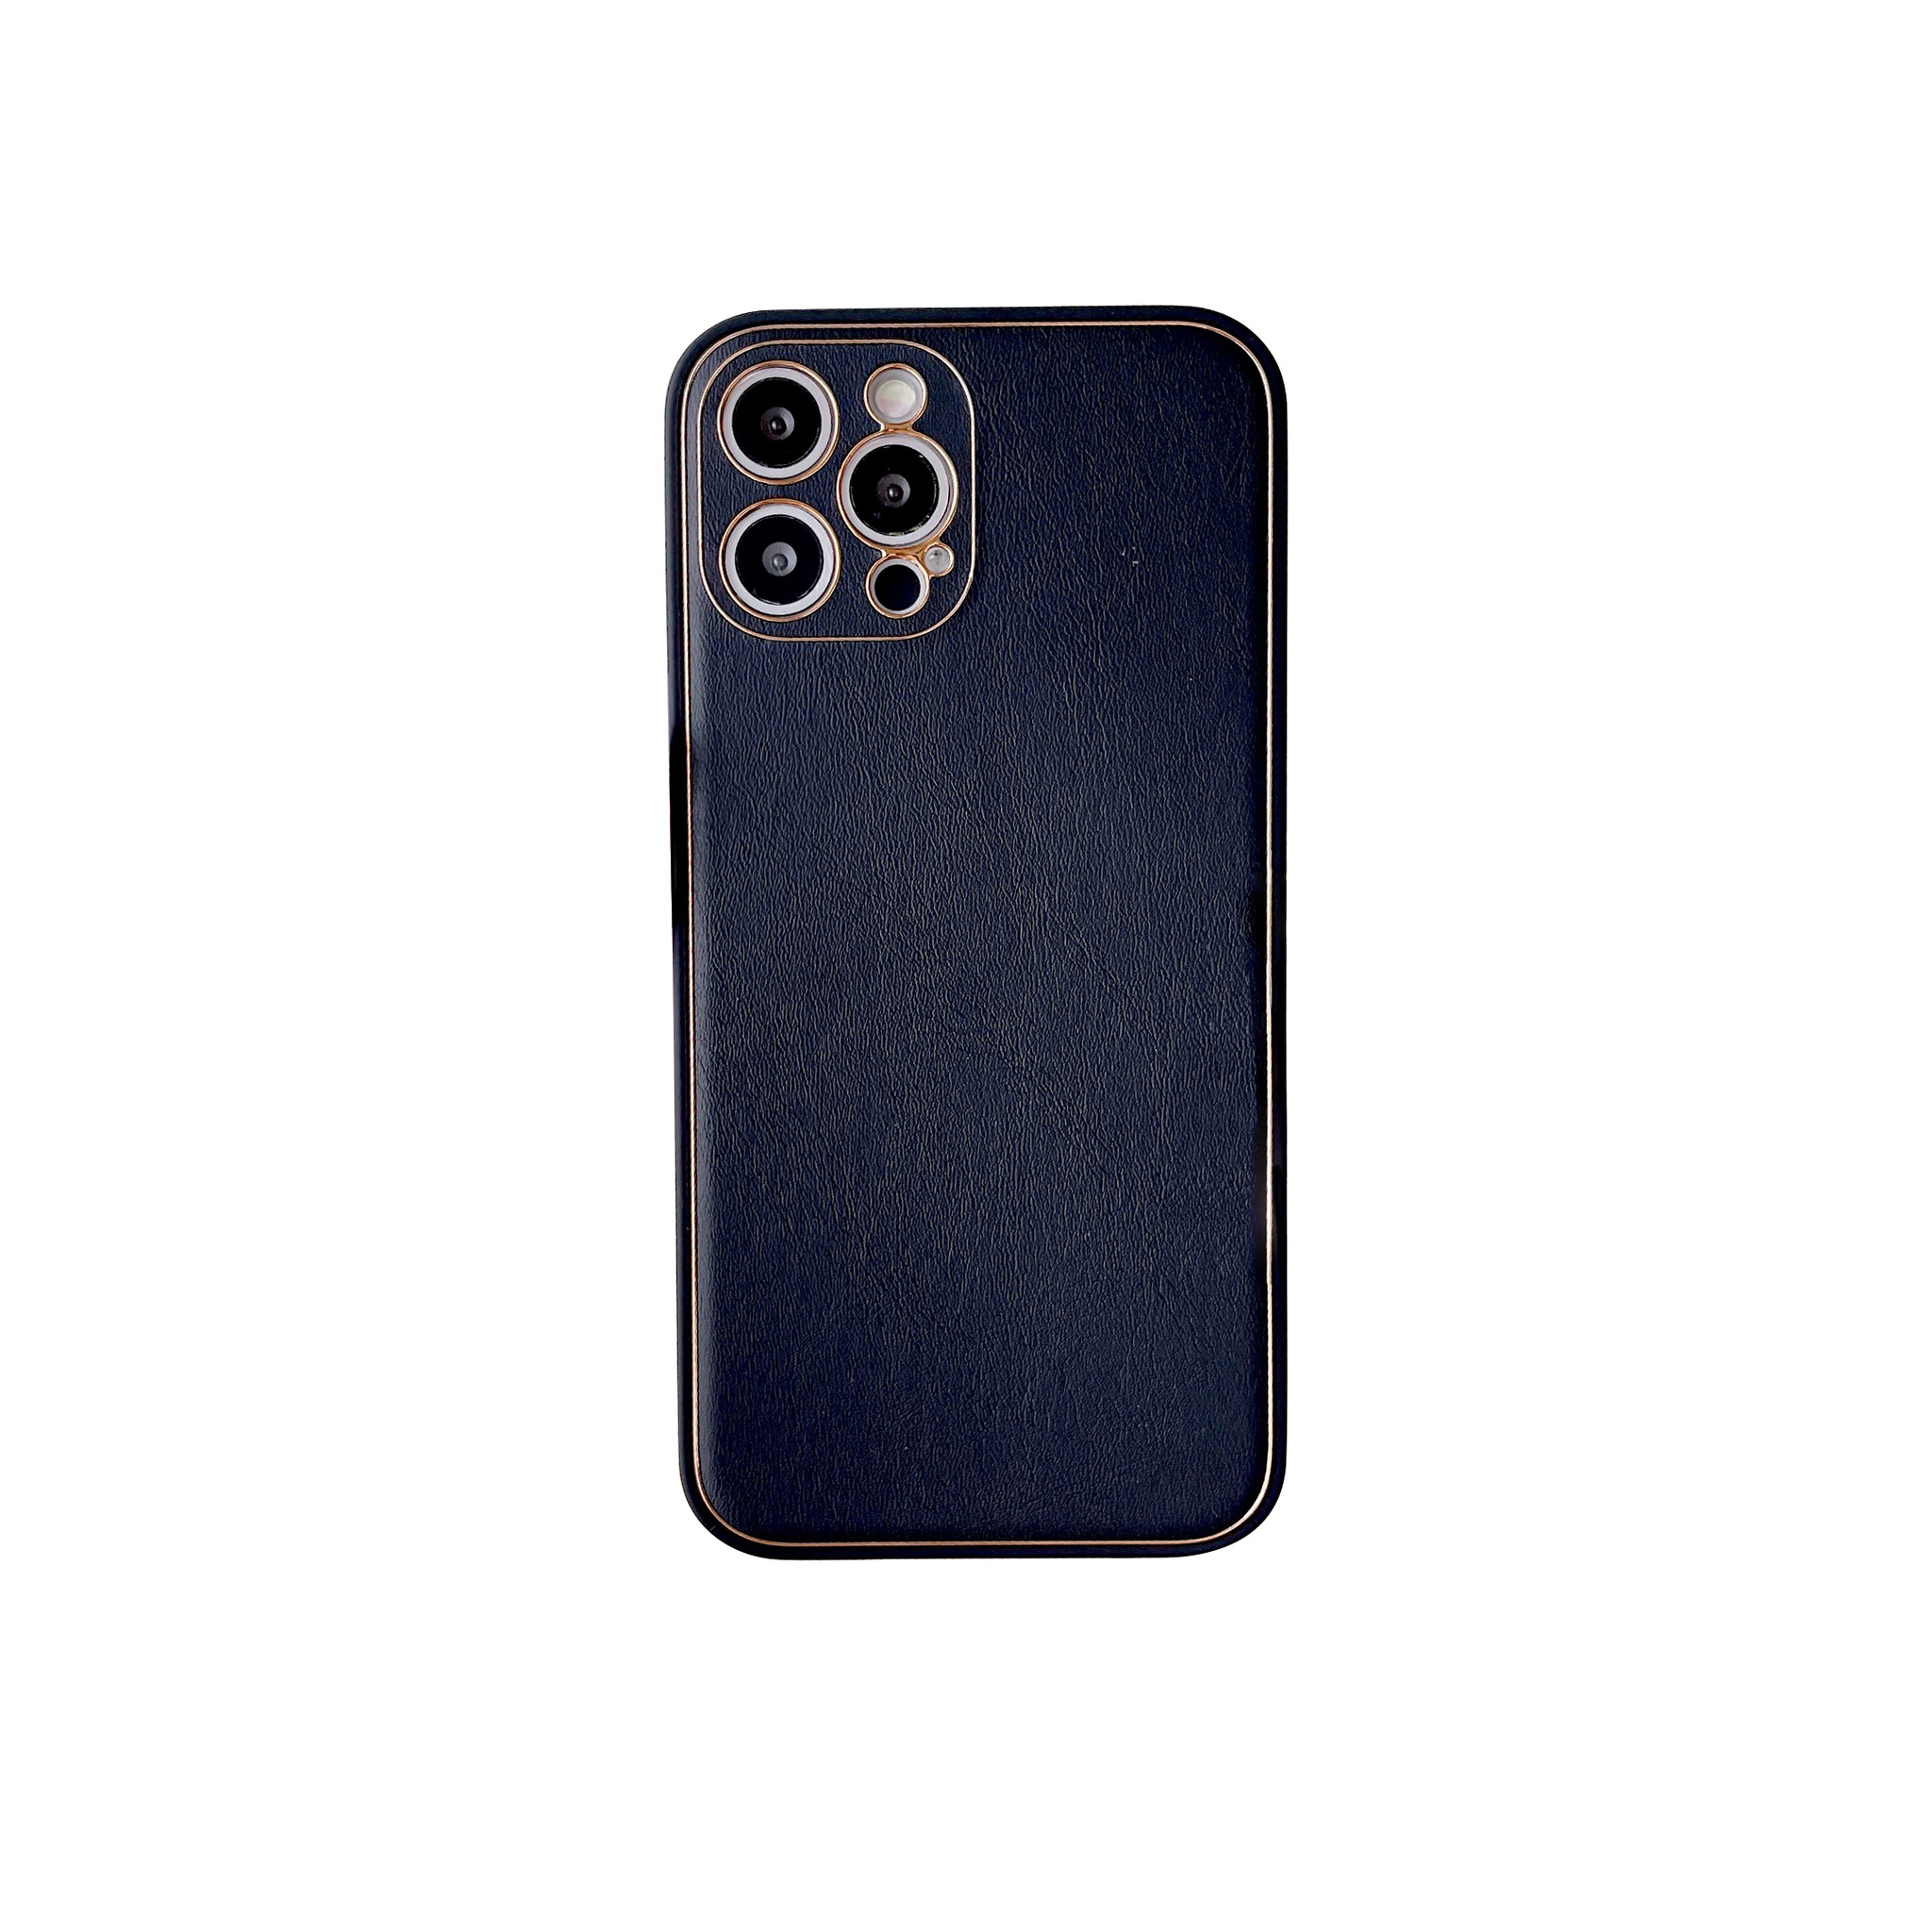 iPhone 11 Pro Max Back Cover Hoesje - leer - Luxe - Backcover - Apple iPhone 11 Pro Max - Zwart/Goud